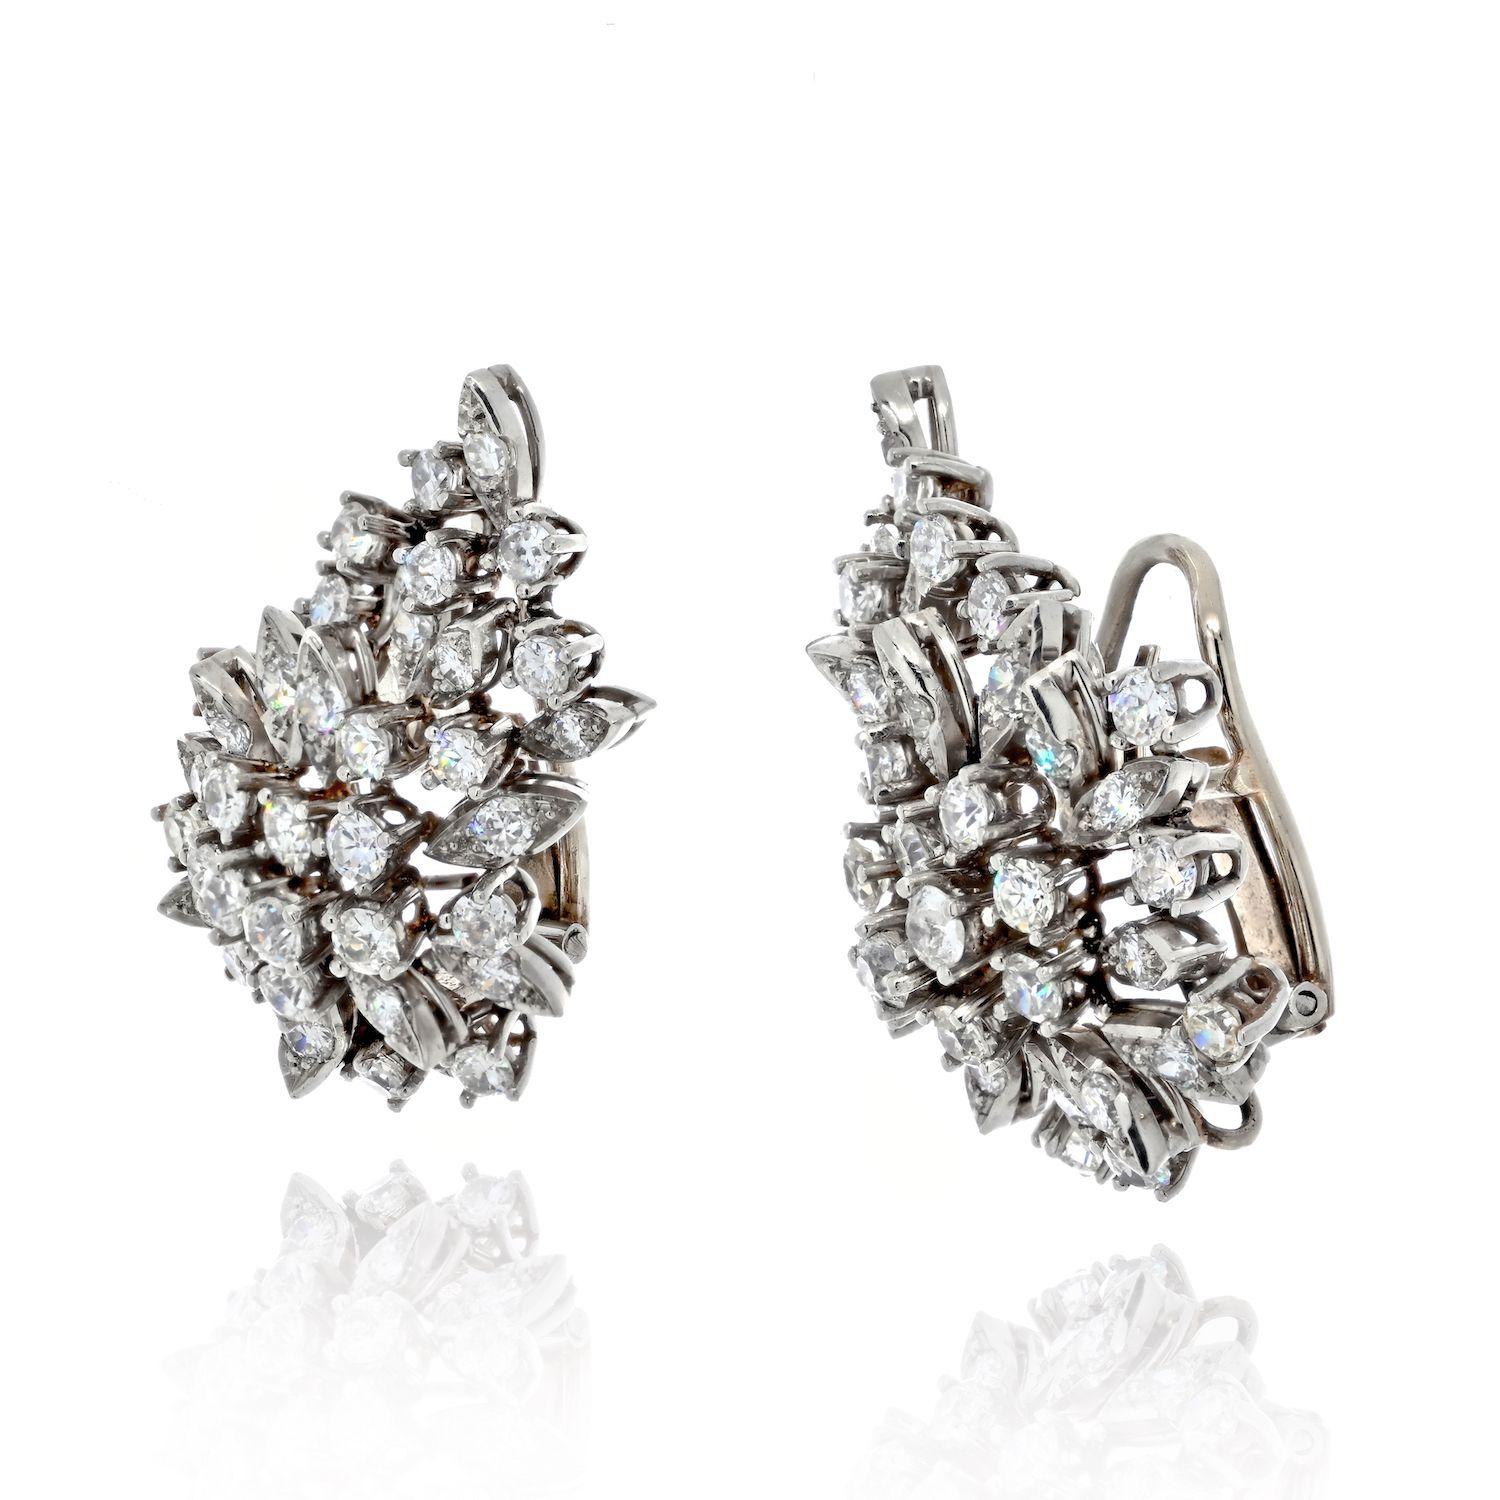 Platinum 8 Carat Round Diamond Cluster Clip Earrings.
Lovely estate earrings that are perfect for the mother of the bride or for you to wear on your next event. Brilliant sparkle, made in platinum, durable, quality pair. This is an estate pair and